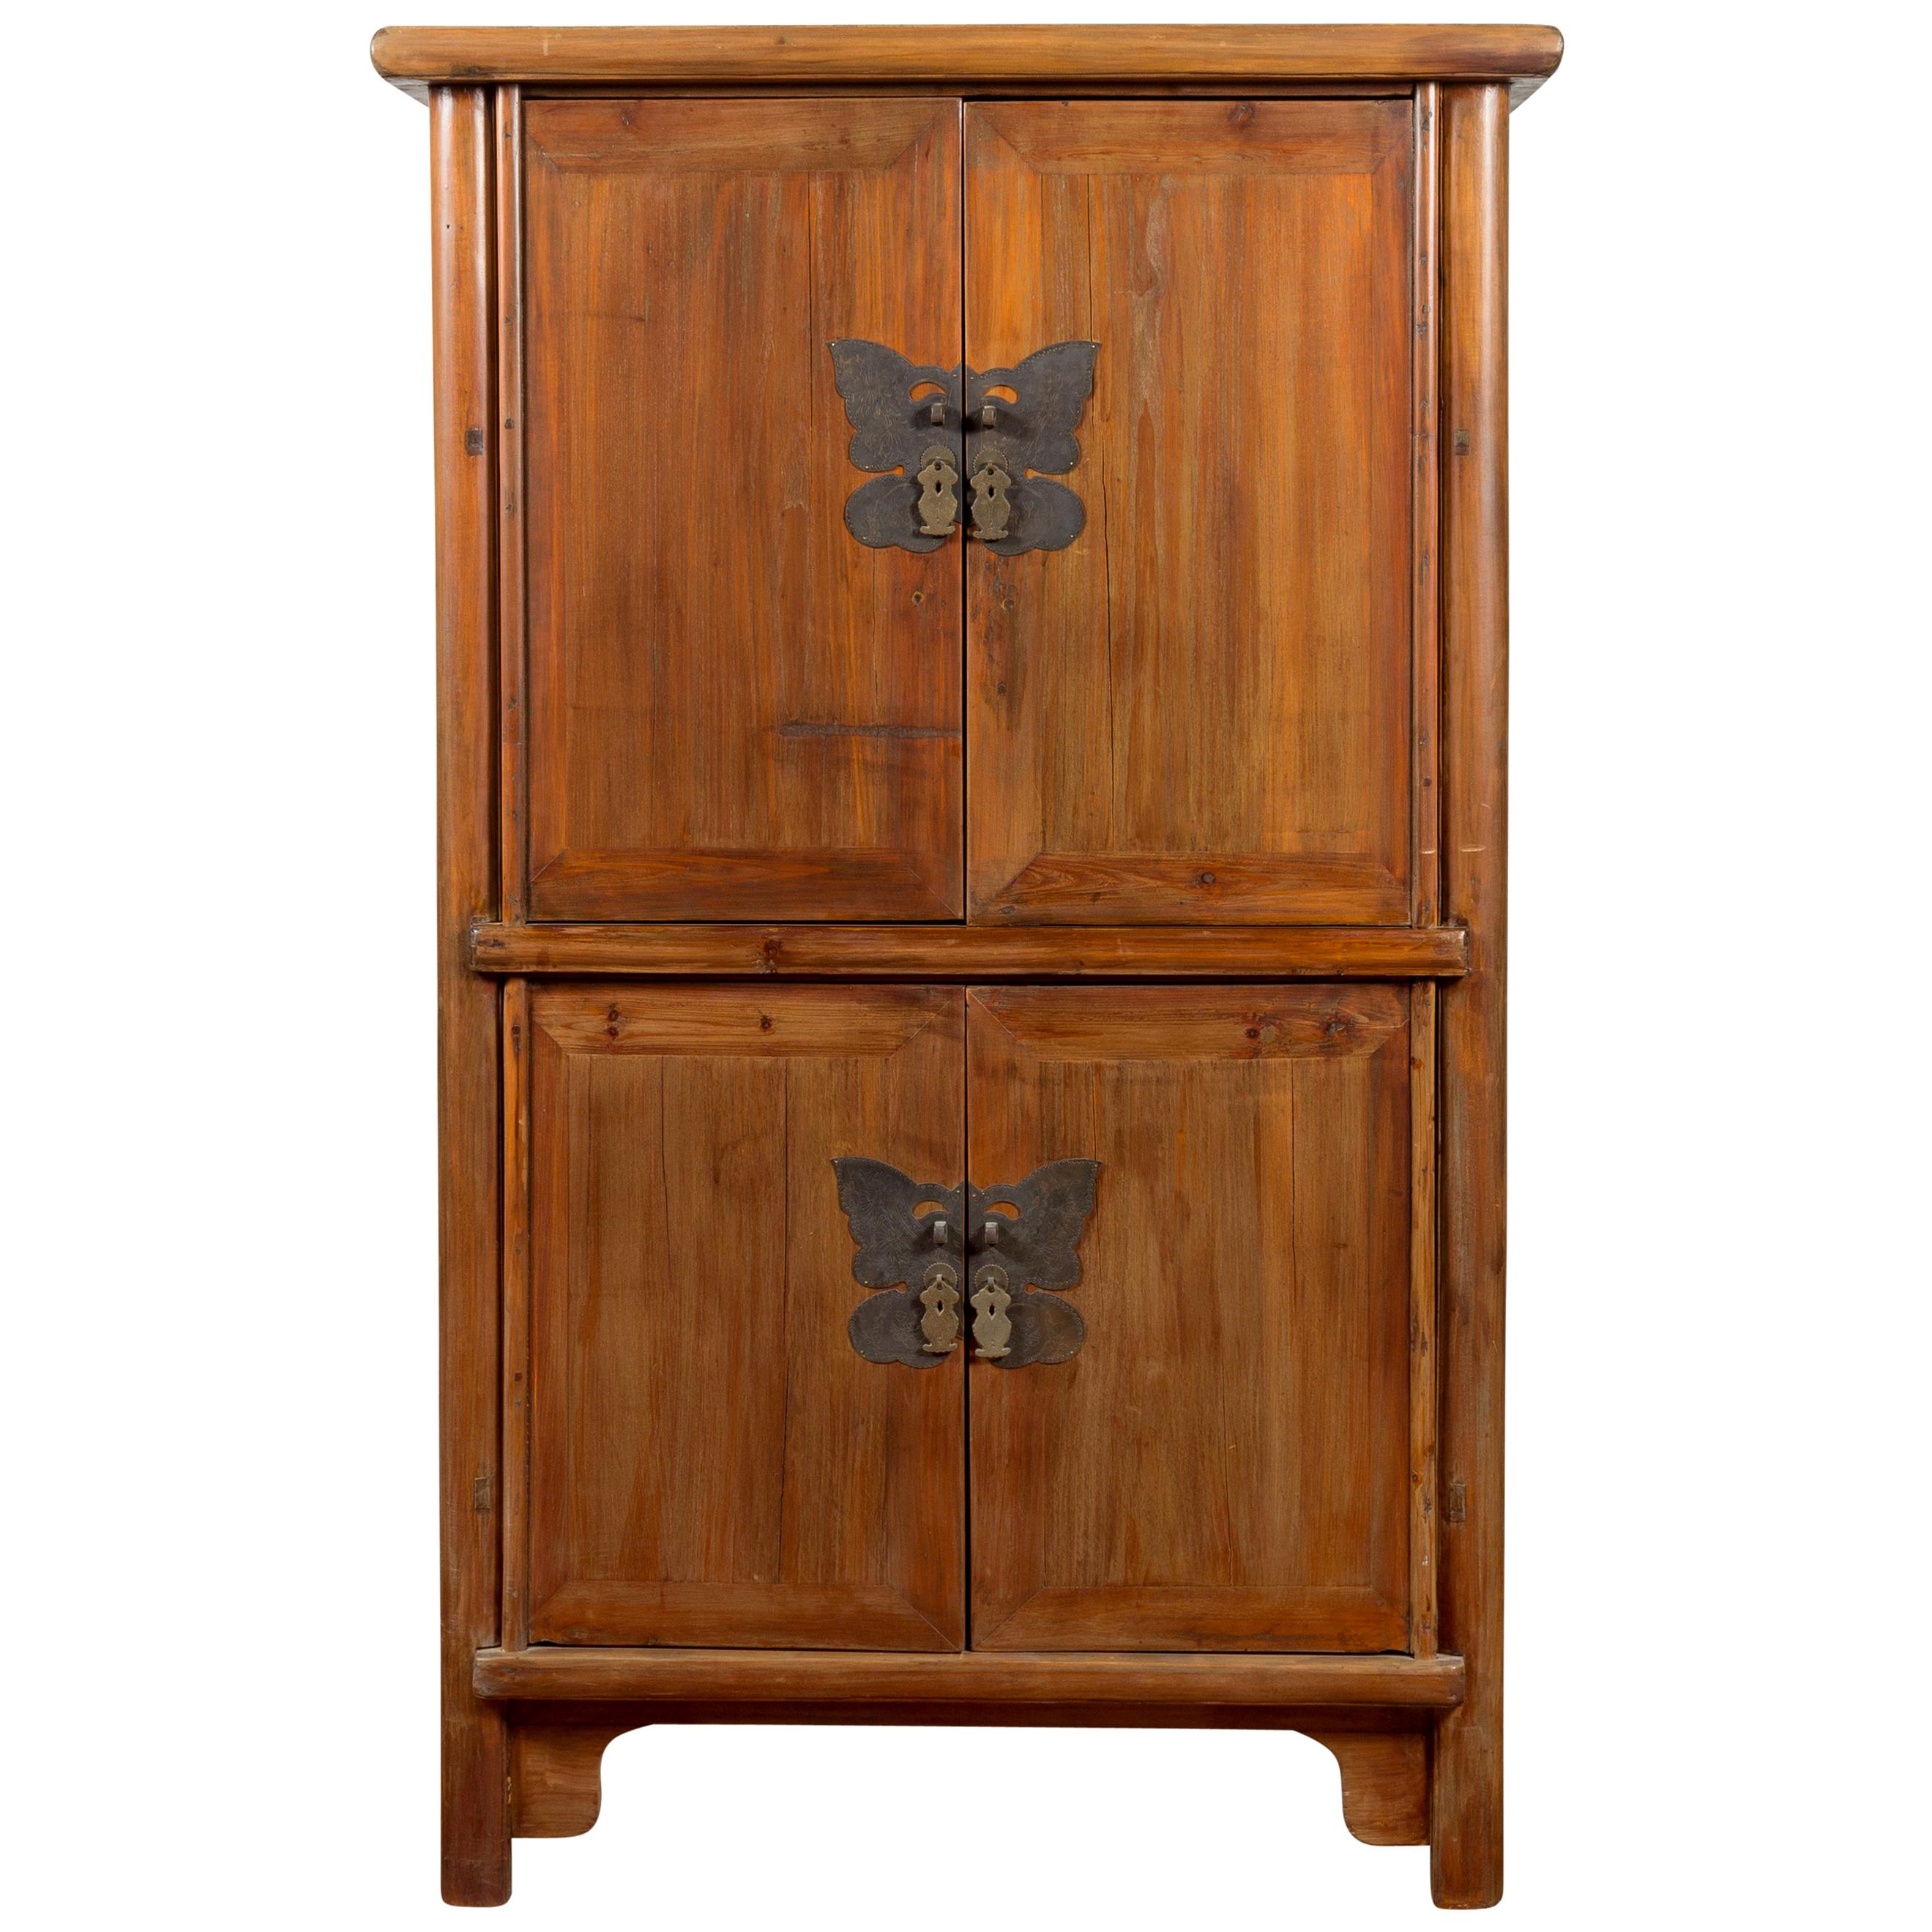 Chinese 19th Century Qing Dynasty Period Wedding Cabinet with Butterfly Hardware